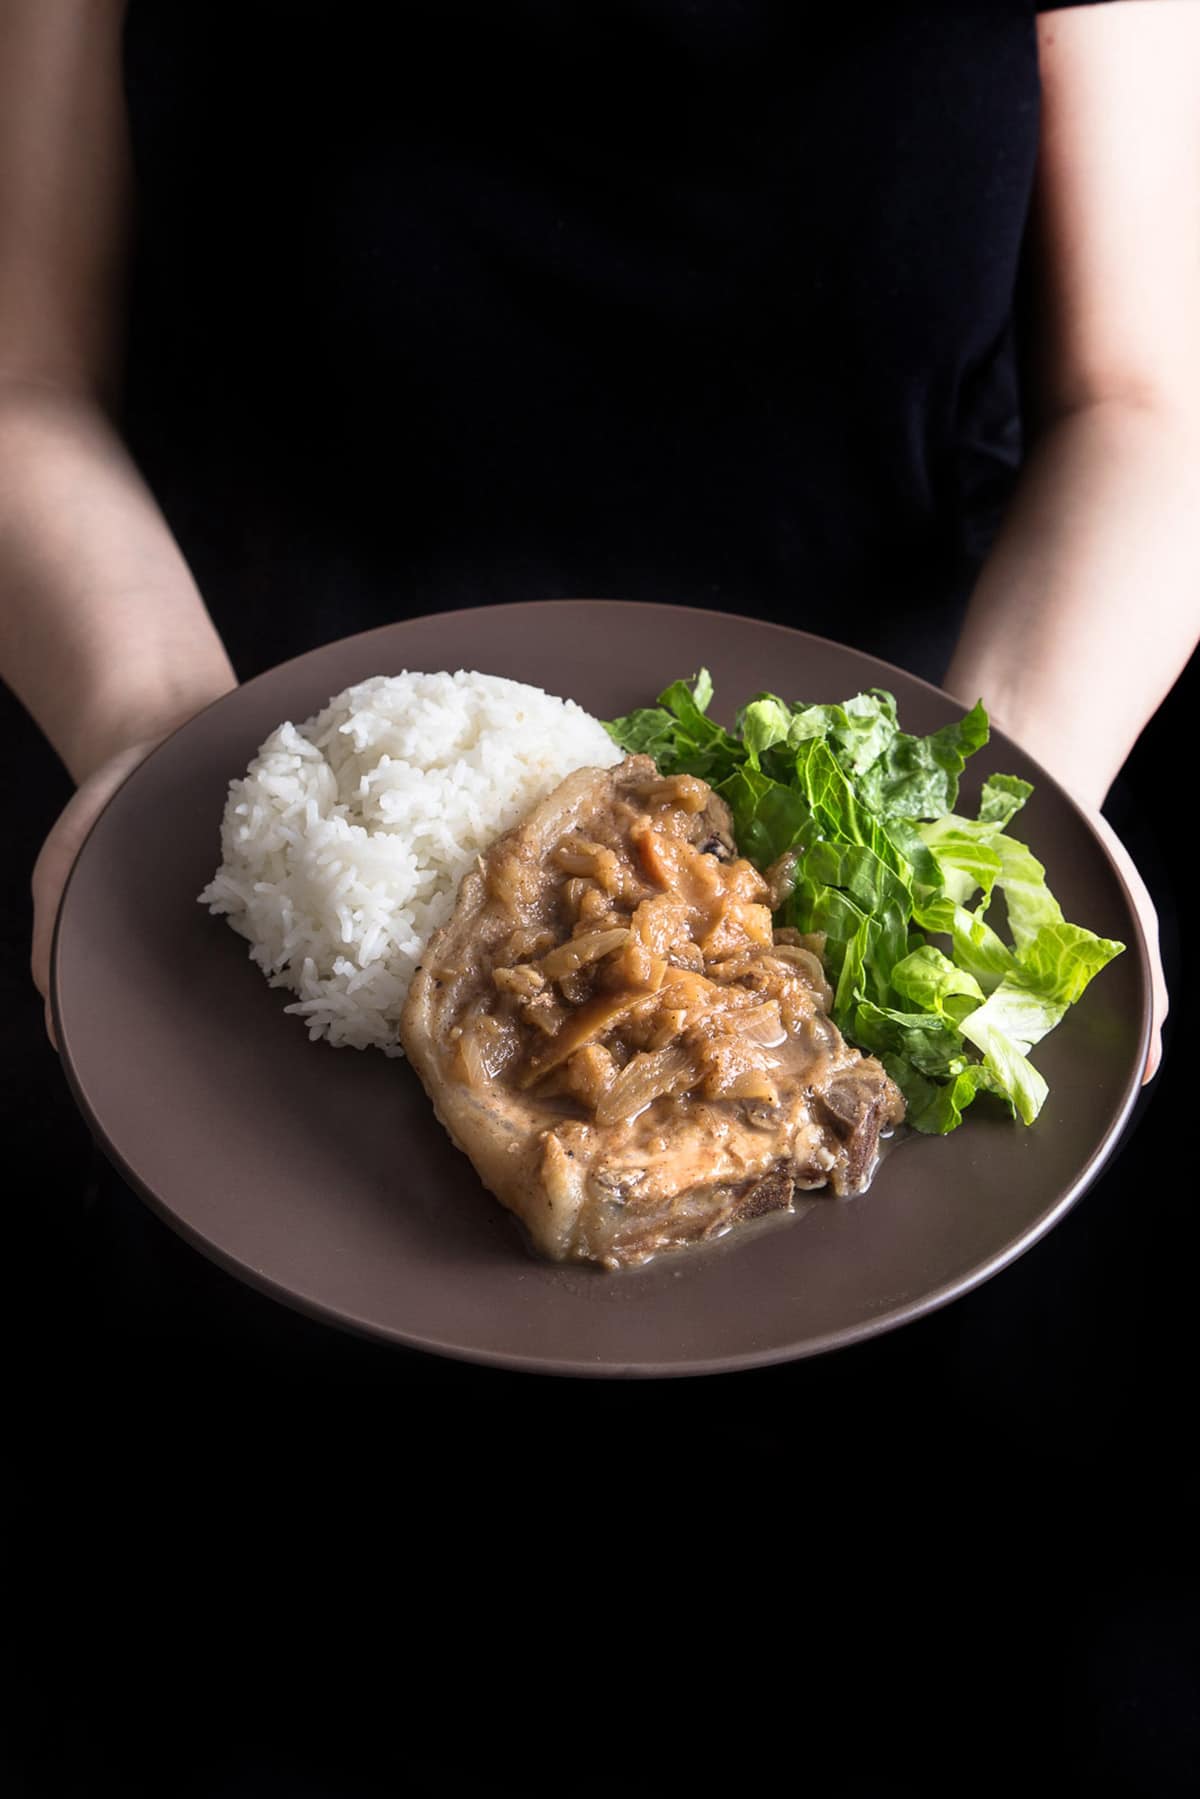 Make this quick & easy 1-minute pressure cooker pork chops and simple homemade applesauce. Moist & tender pork chops drizzled with warm cinnamon applesauce. Yum!!